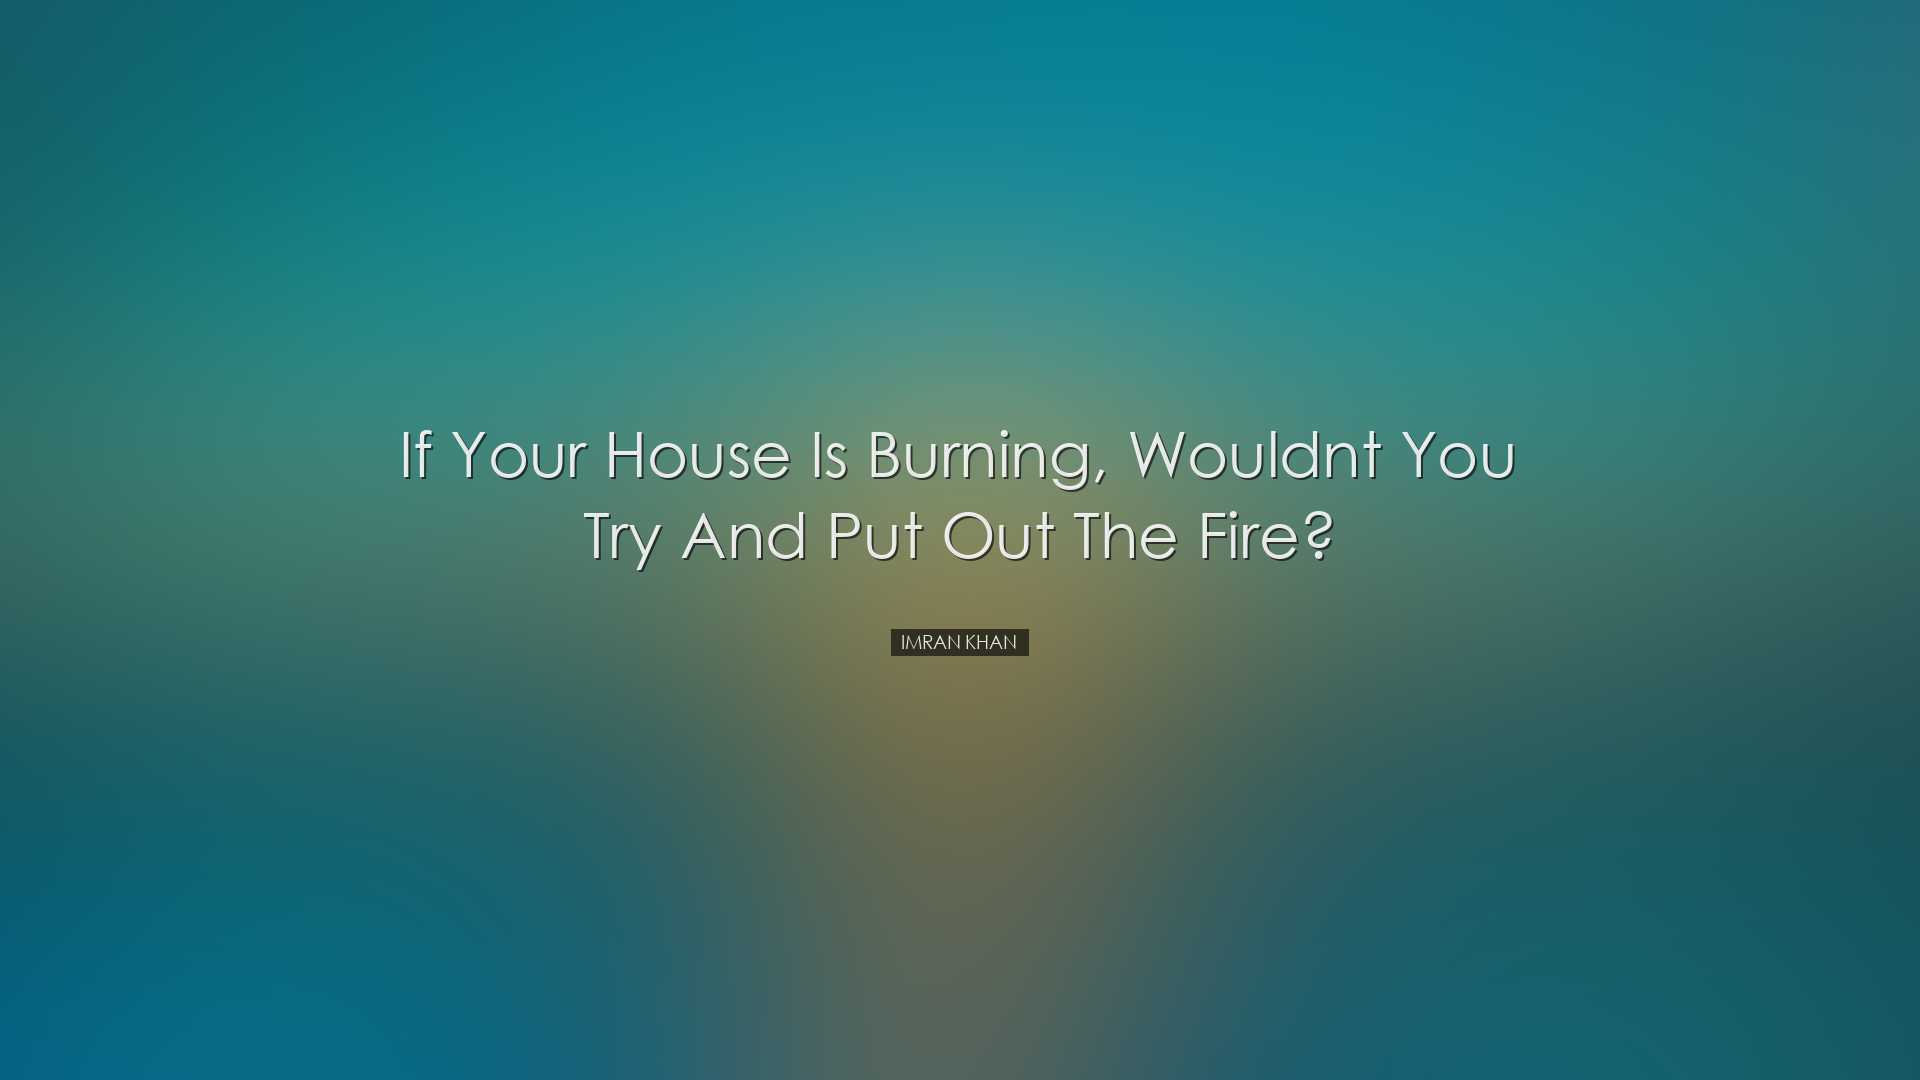 If your house is burning, wouldnt you try and put out the fire? -